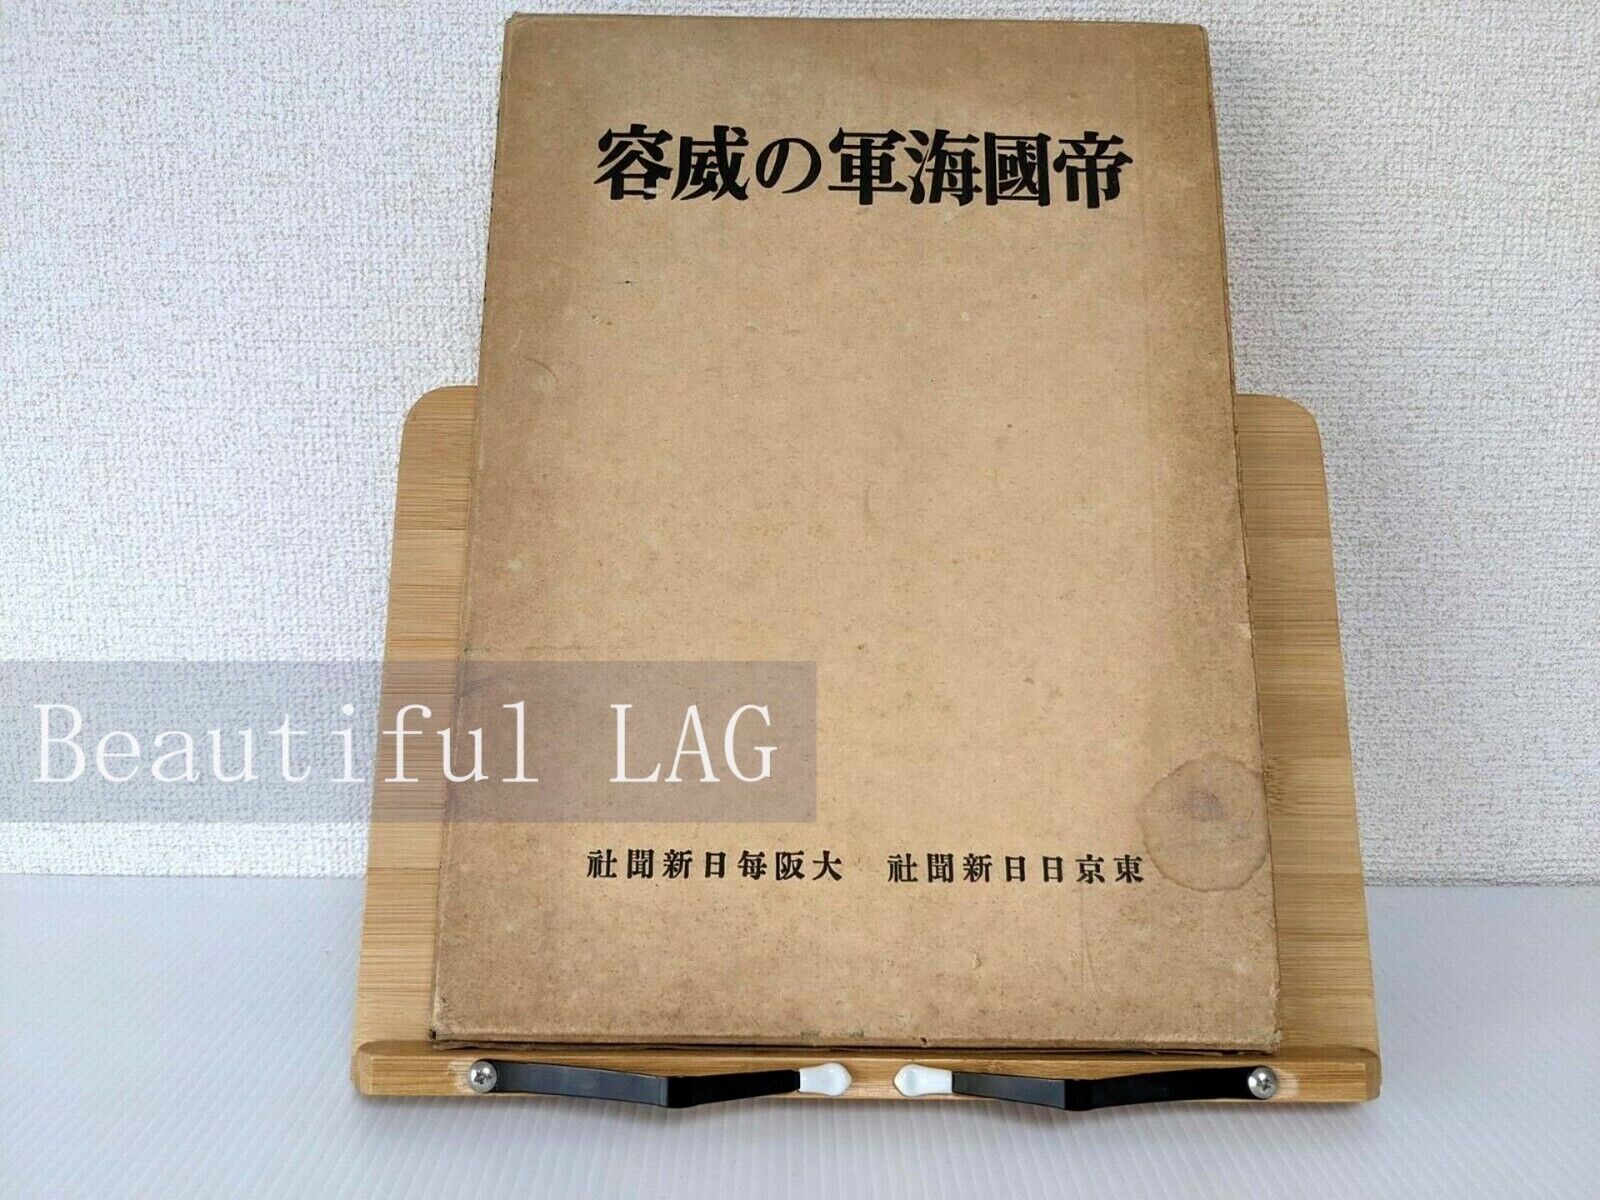 The Dignified Imperial Japanese Navy WW2 Photo Book 1942 Showa era 17